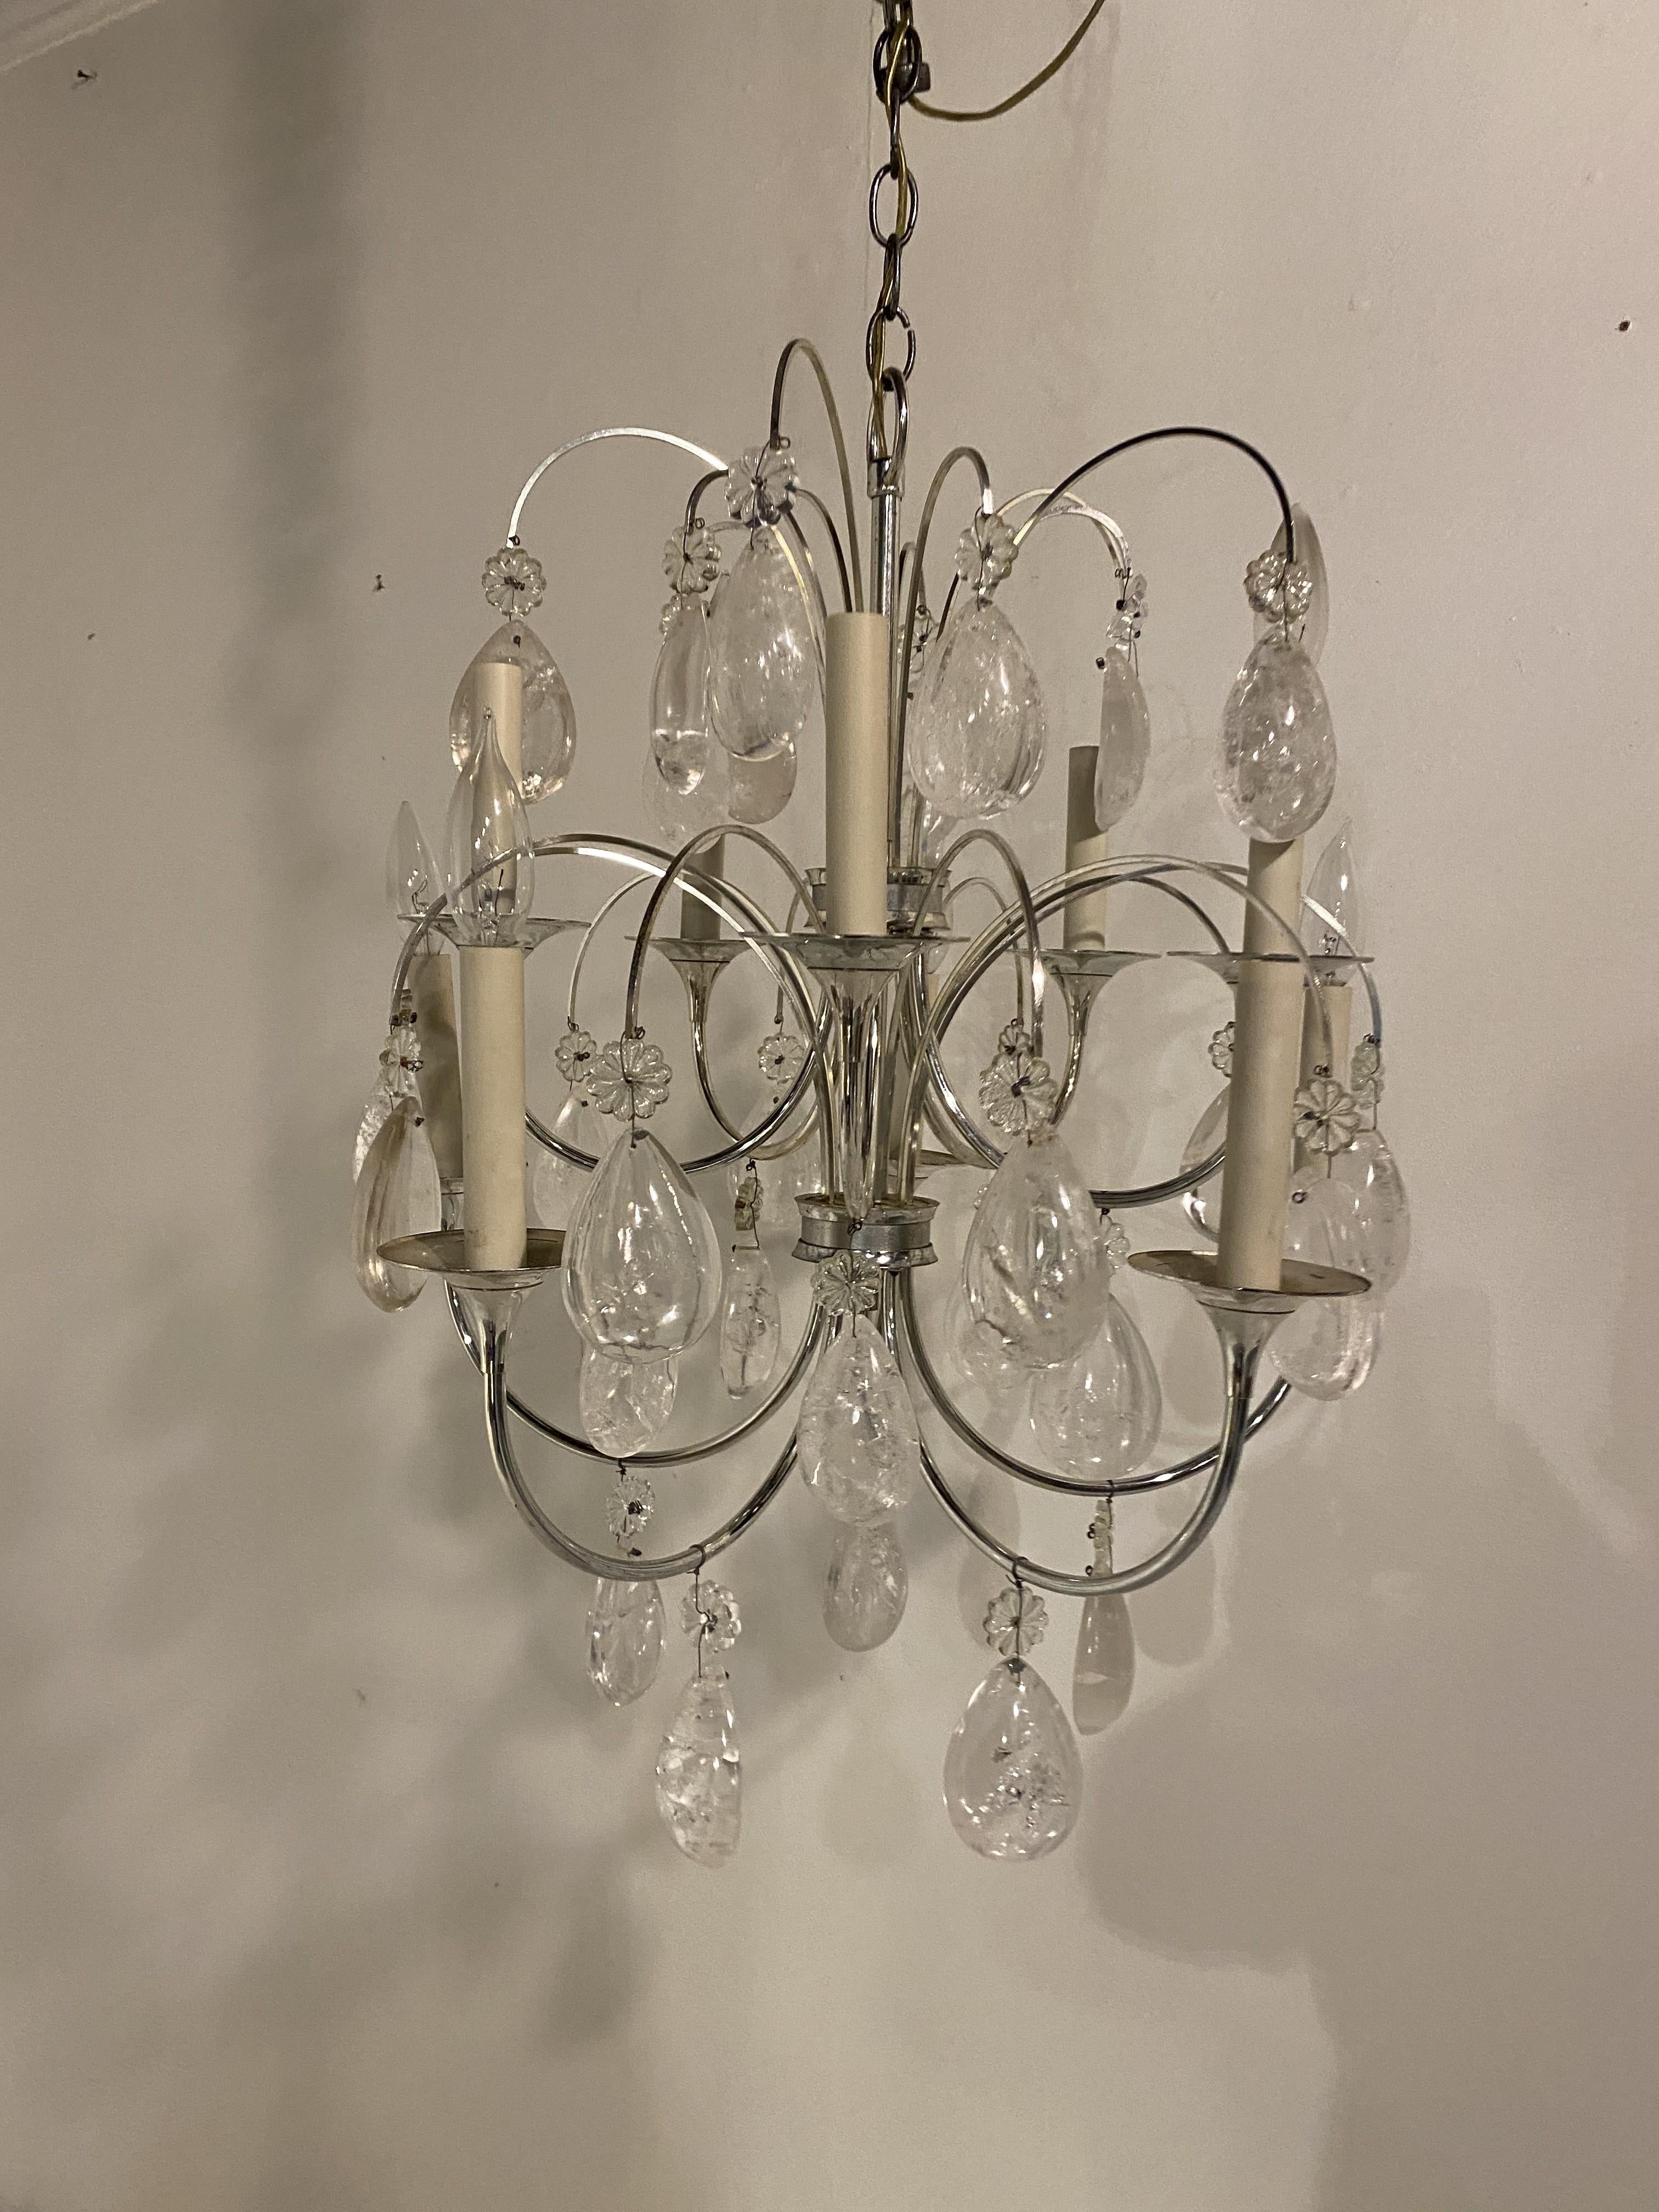 French Provincial 1930's French Silver Plated Chandelier with Rock Crystals For Sale